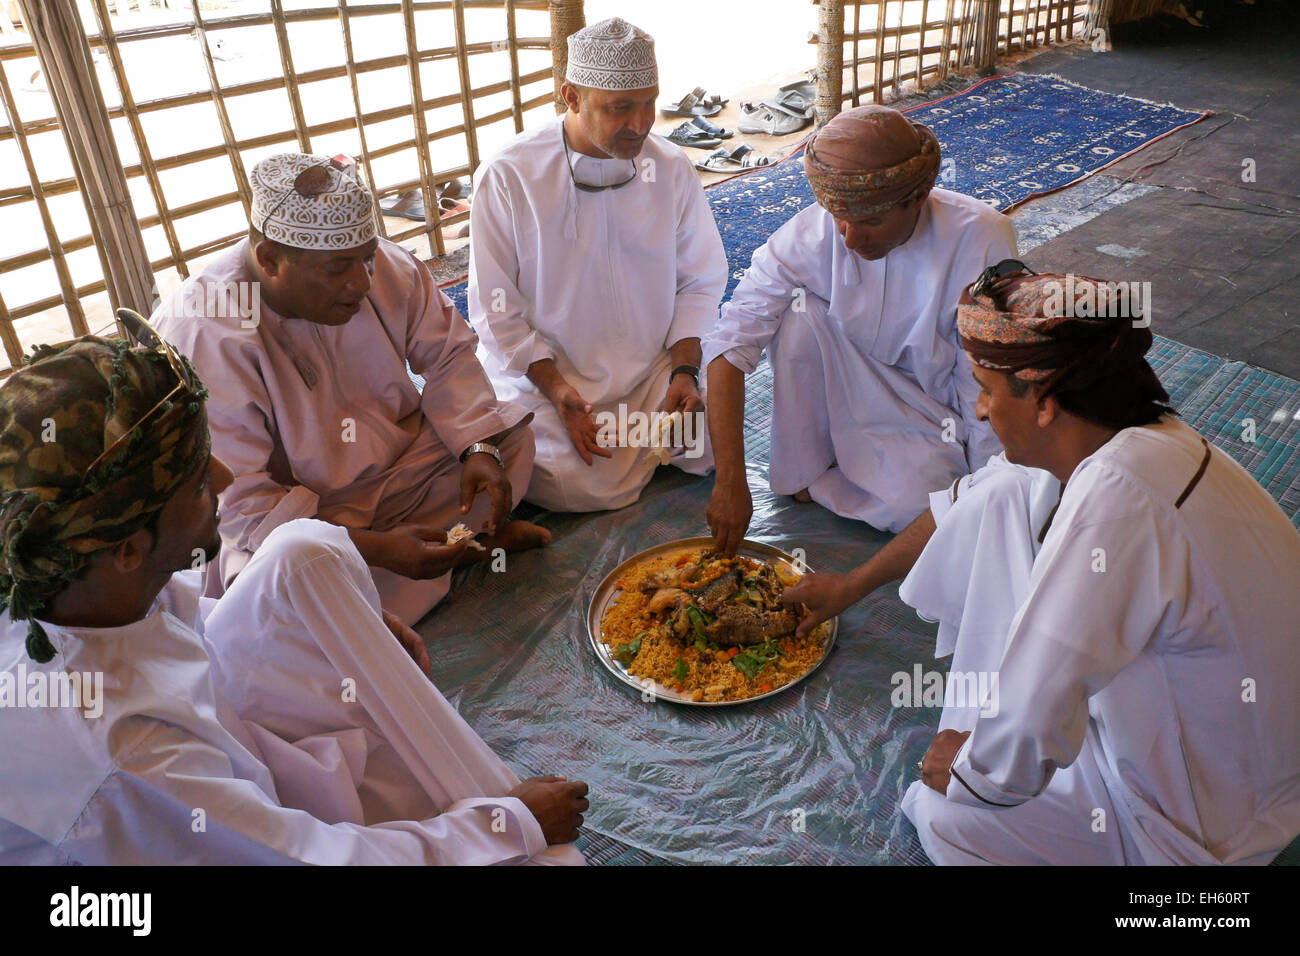 Men sharing a meal in the traditional manner, Oman Stock Photo